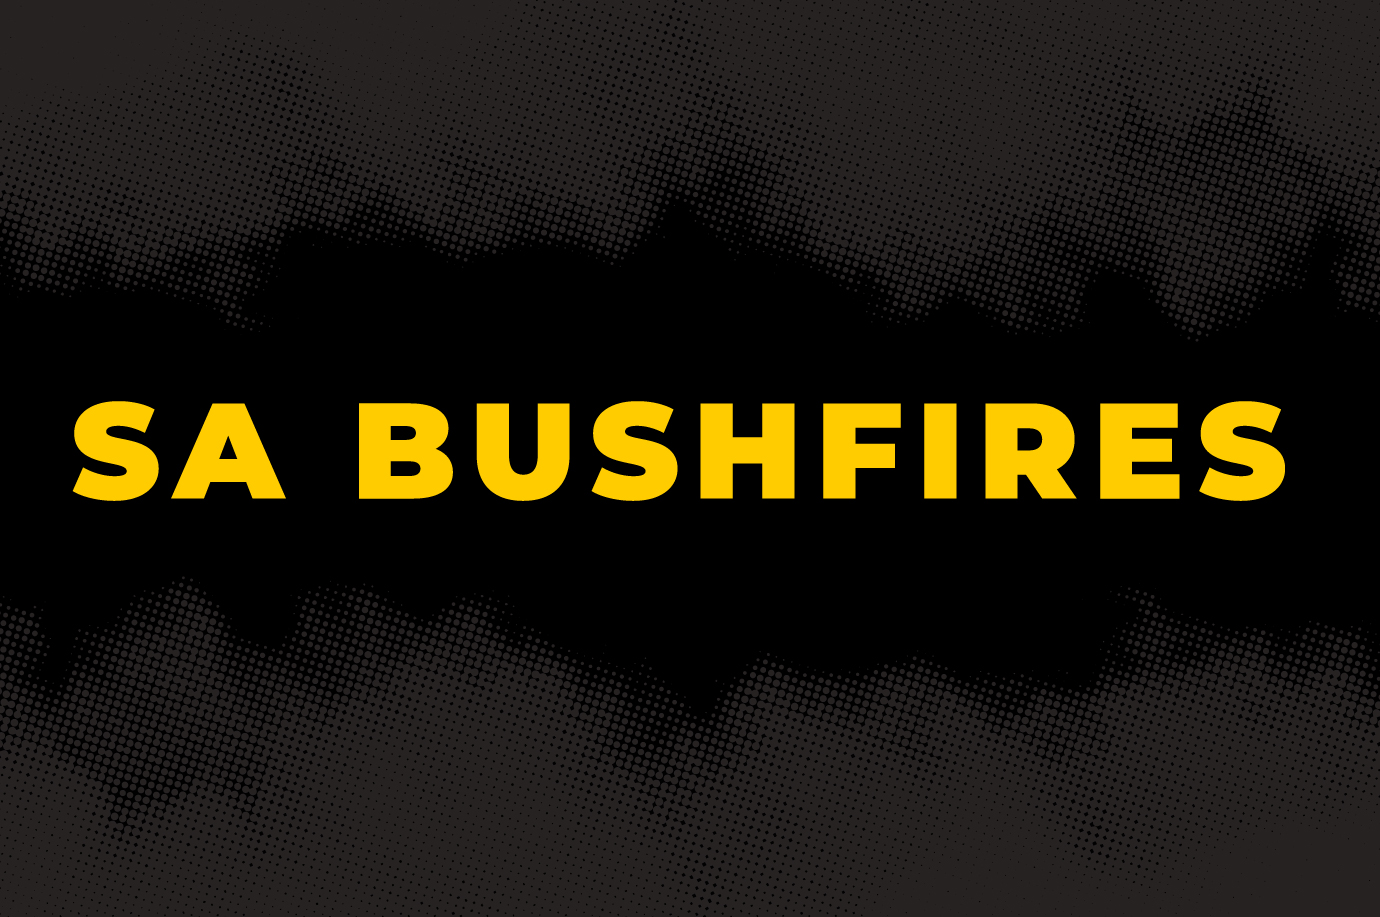 The words SA BUSHFIRES in yellow text on a horizontal black rectangle with a mottled grey effect over the top and bottom thirds.